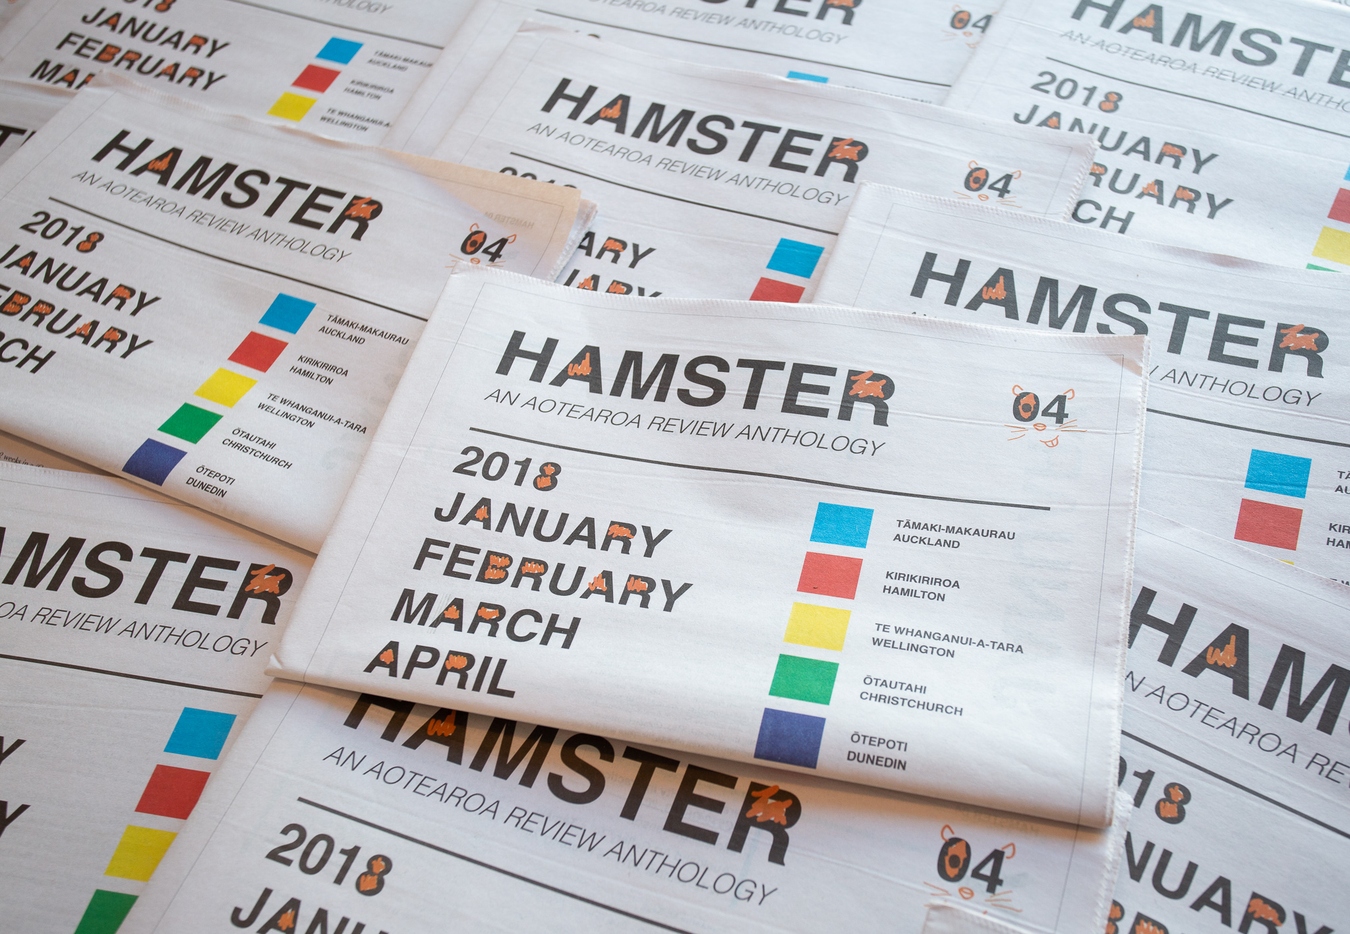 Image: HAMSTER Magazine Issue 4, Cover design by Jane Maloney, M/K Press. Photo: Michelle Wang.